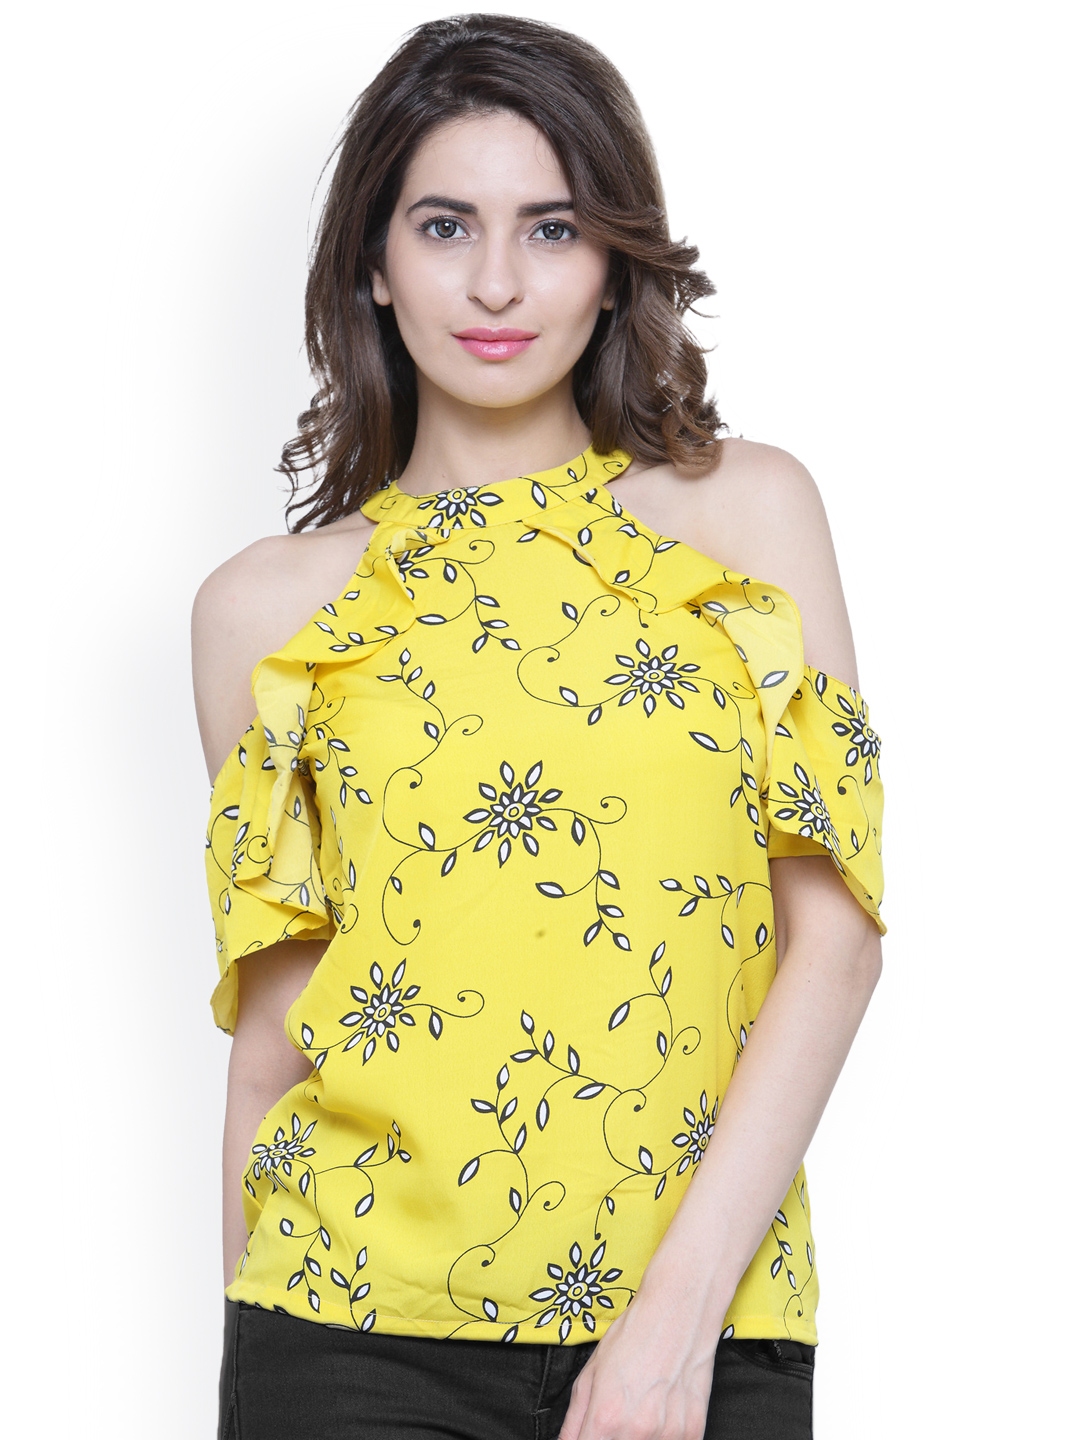 Myntra - Embrace your casual side with these floral tops from